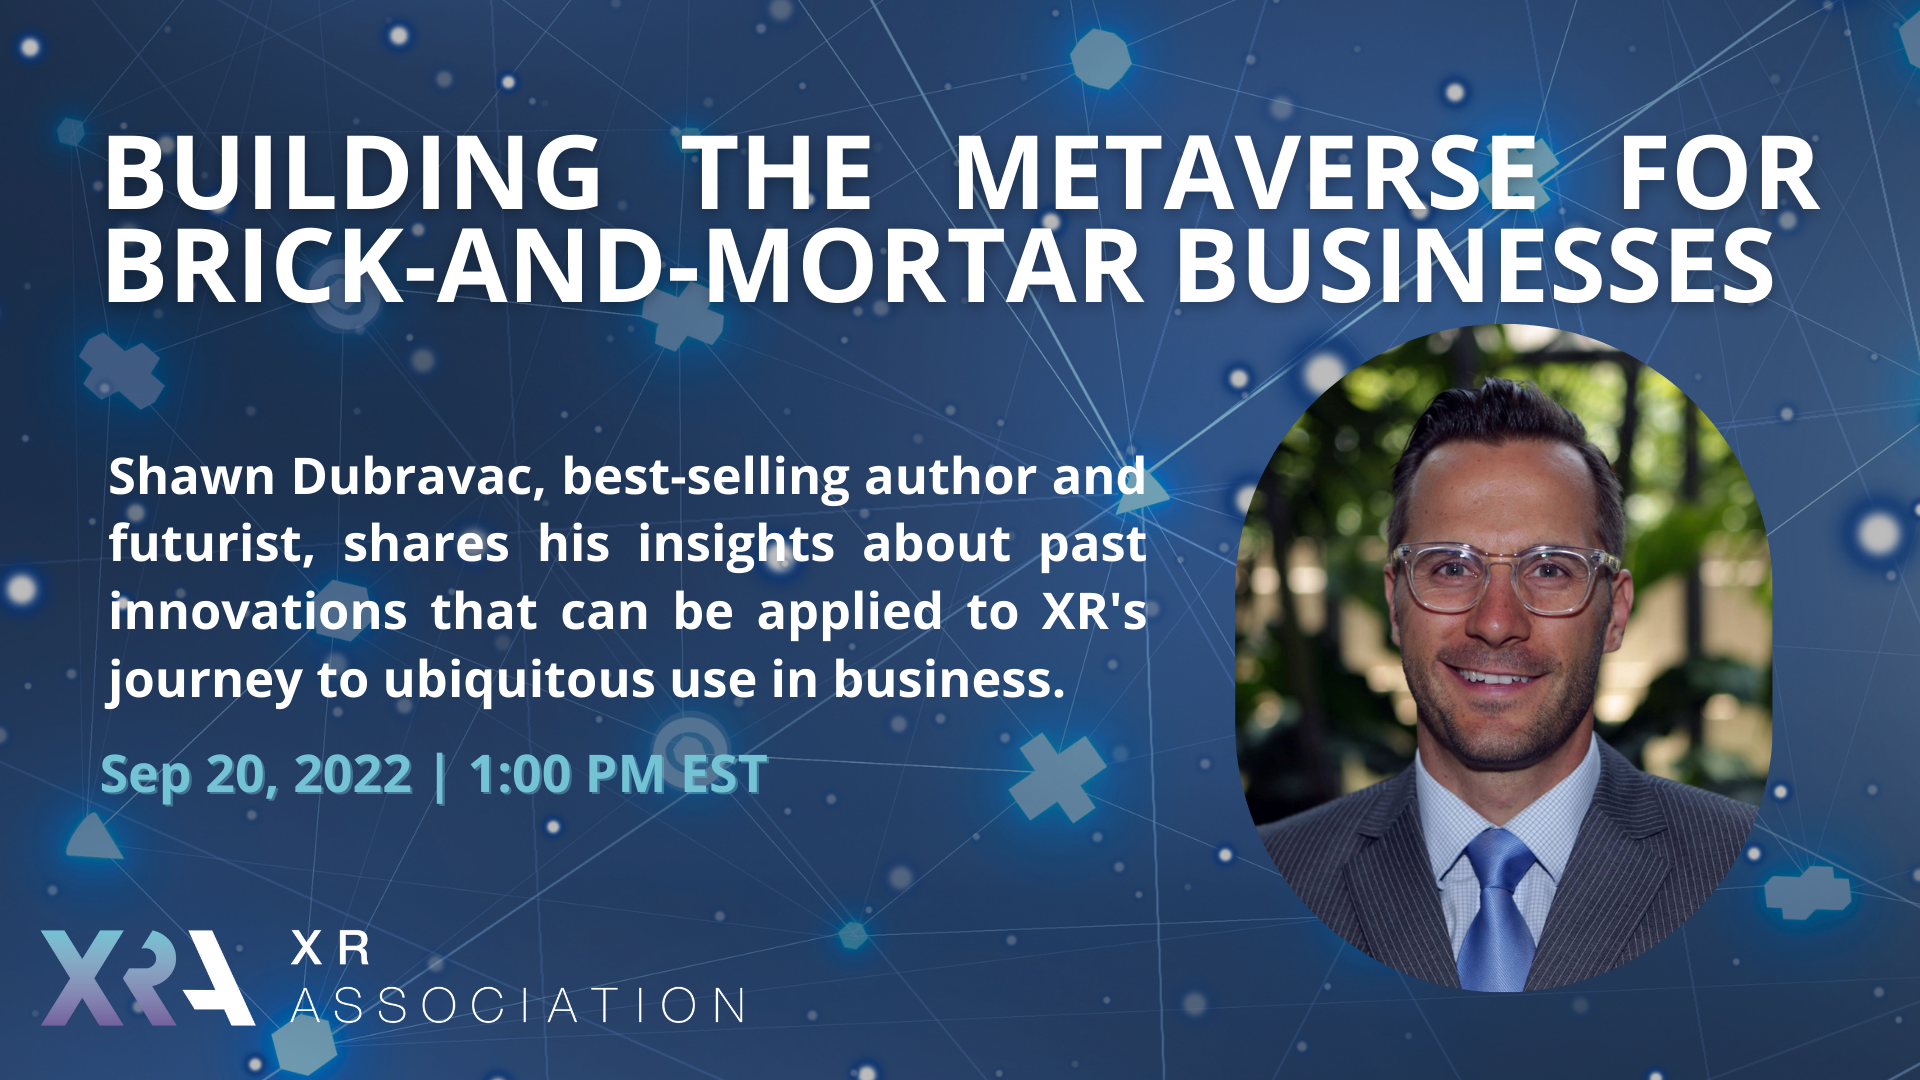 NYT BEST-SELLING AUTHOR SHAWN DUBRAVAC PRESENTS WEBINAR ON “BUILDING THE METAVERSE FOR BUSINESSES” HOSTED BY XRA